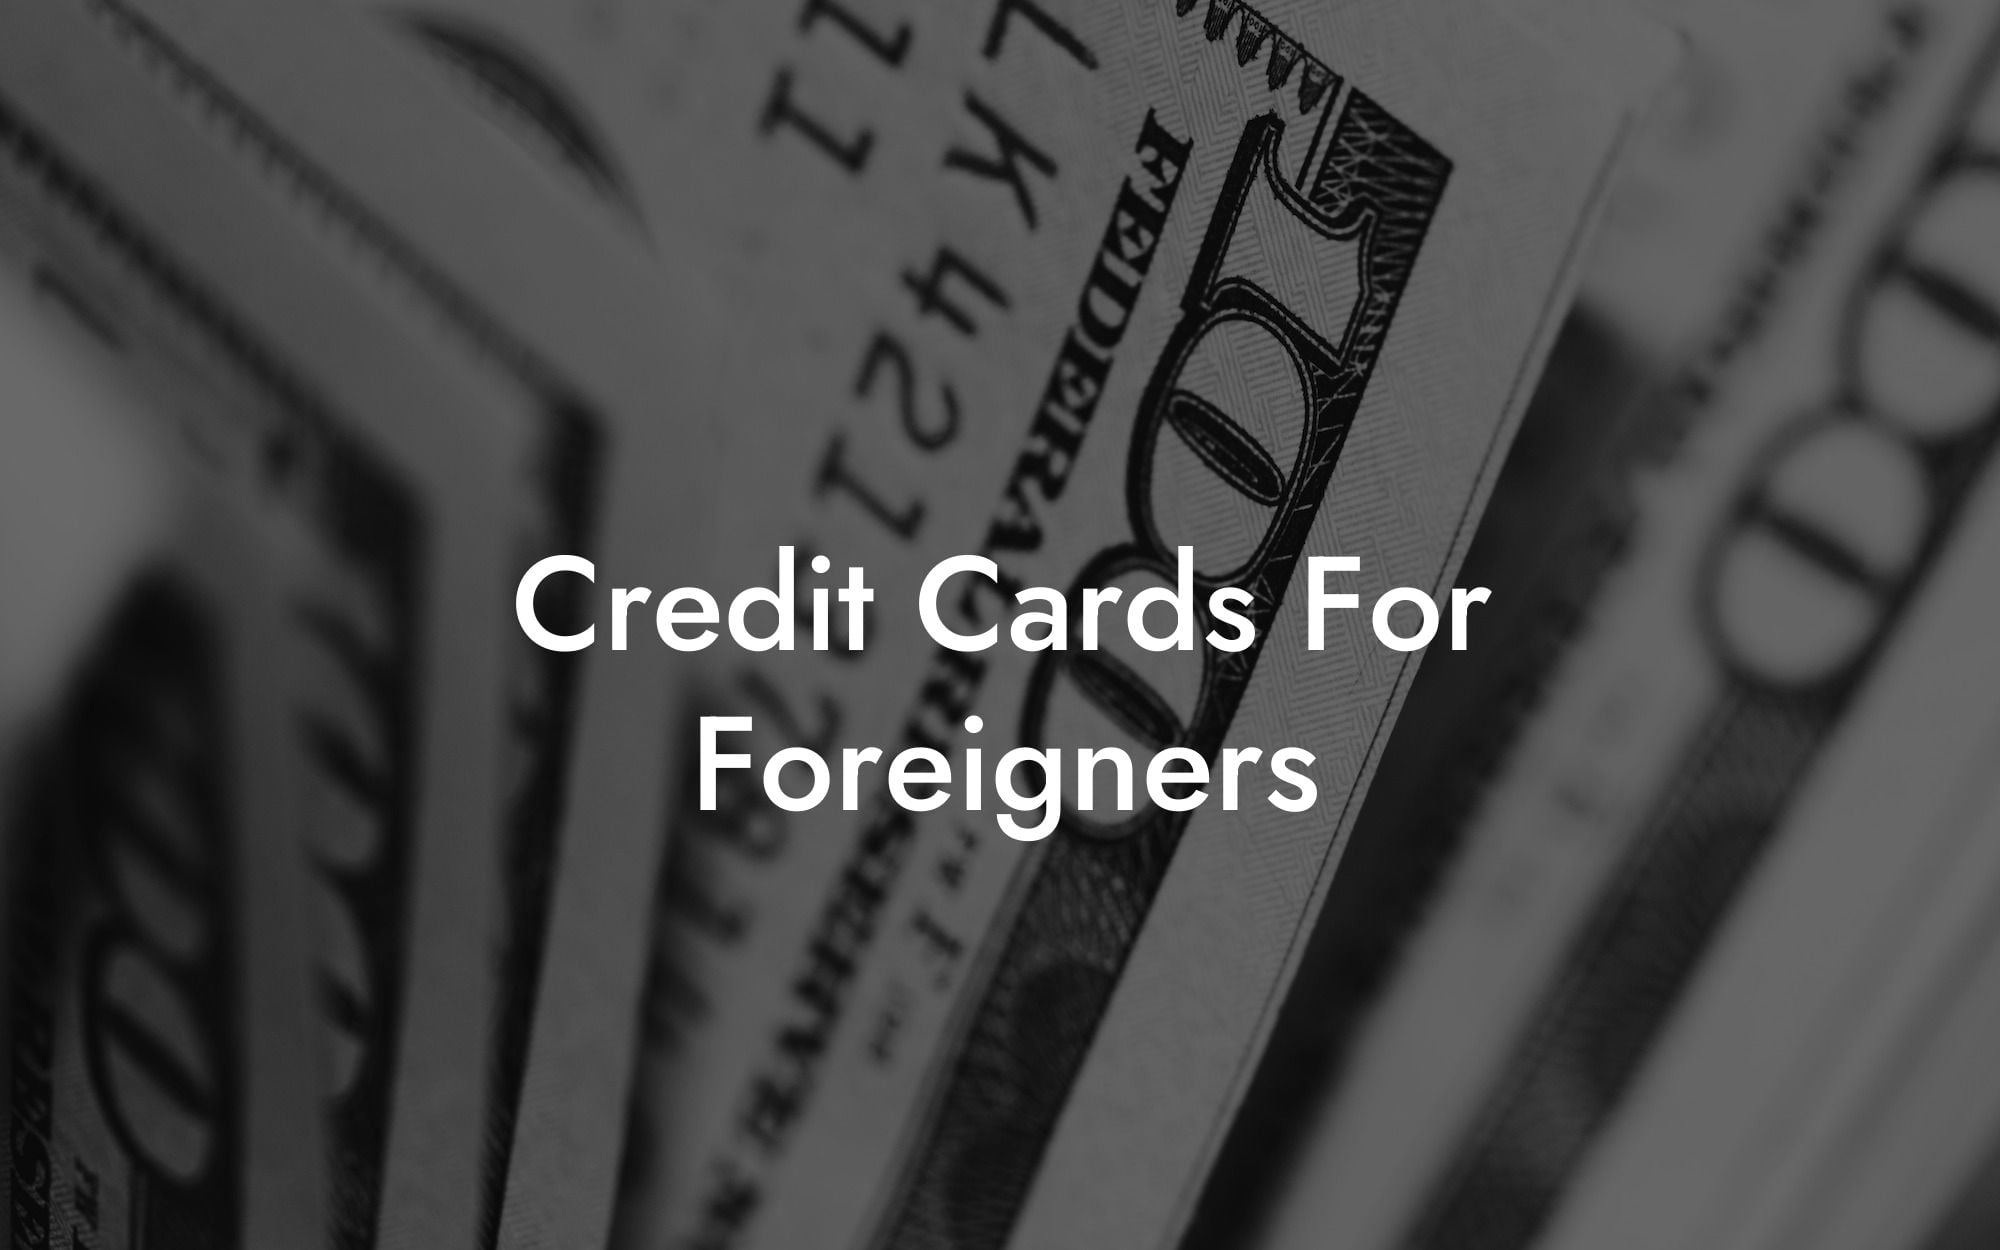 Credit Cards For Foreigners